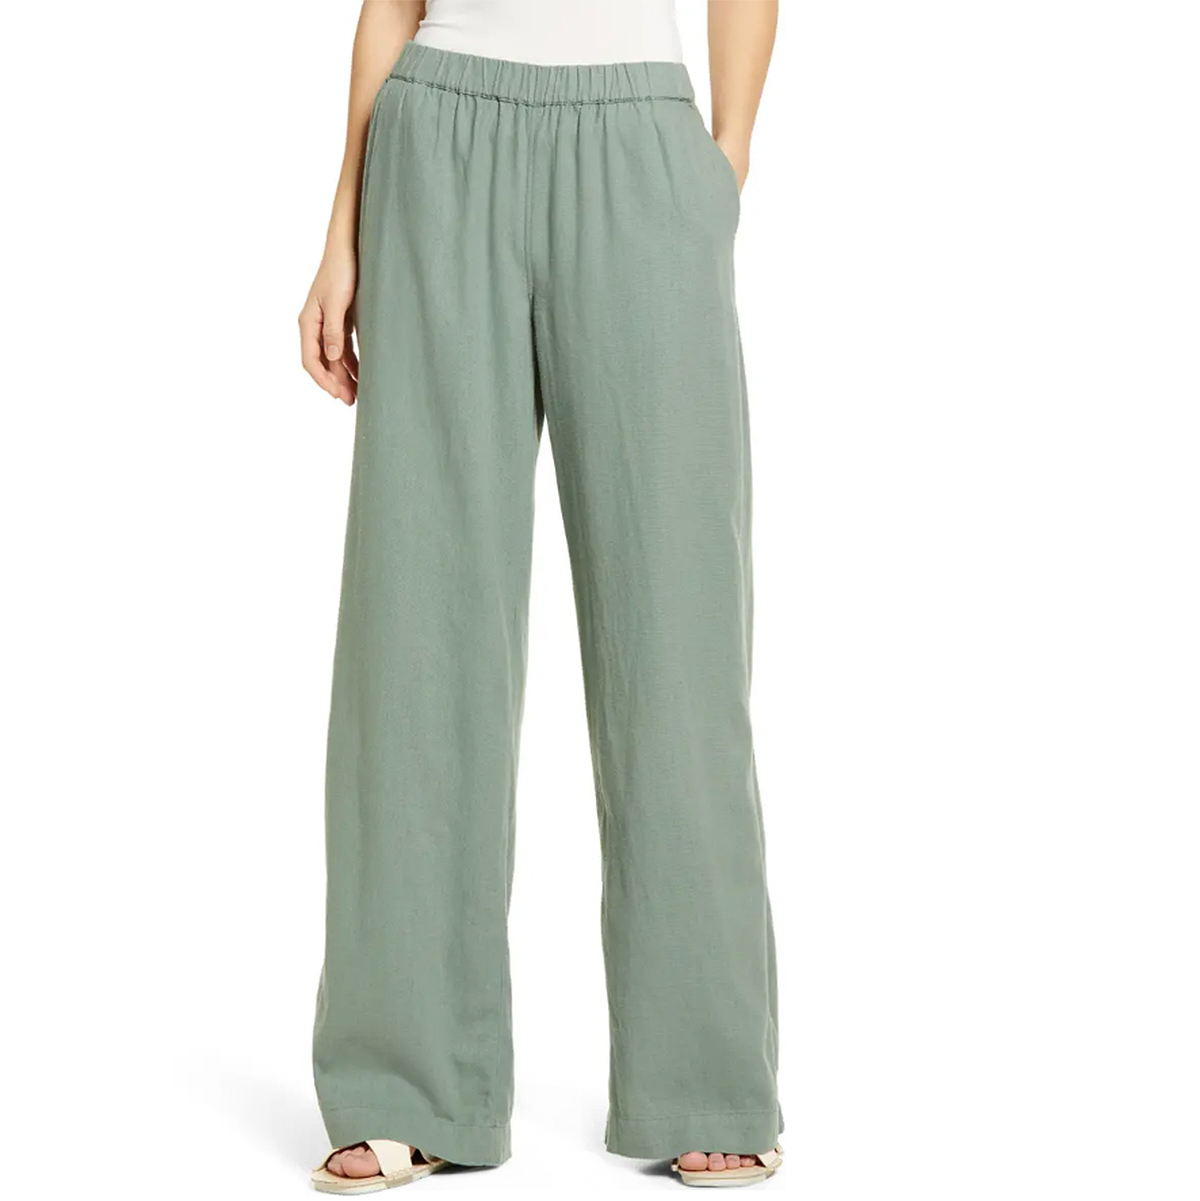 nordstrom-half-yearly-sale-caslon-pants